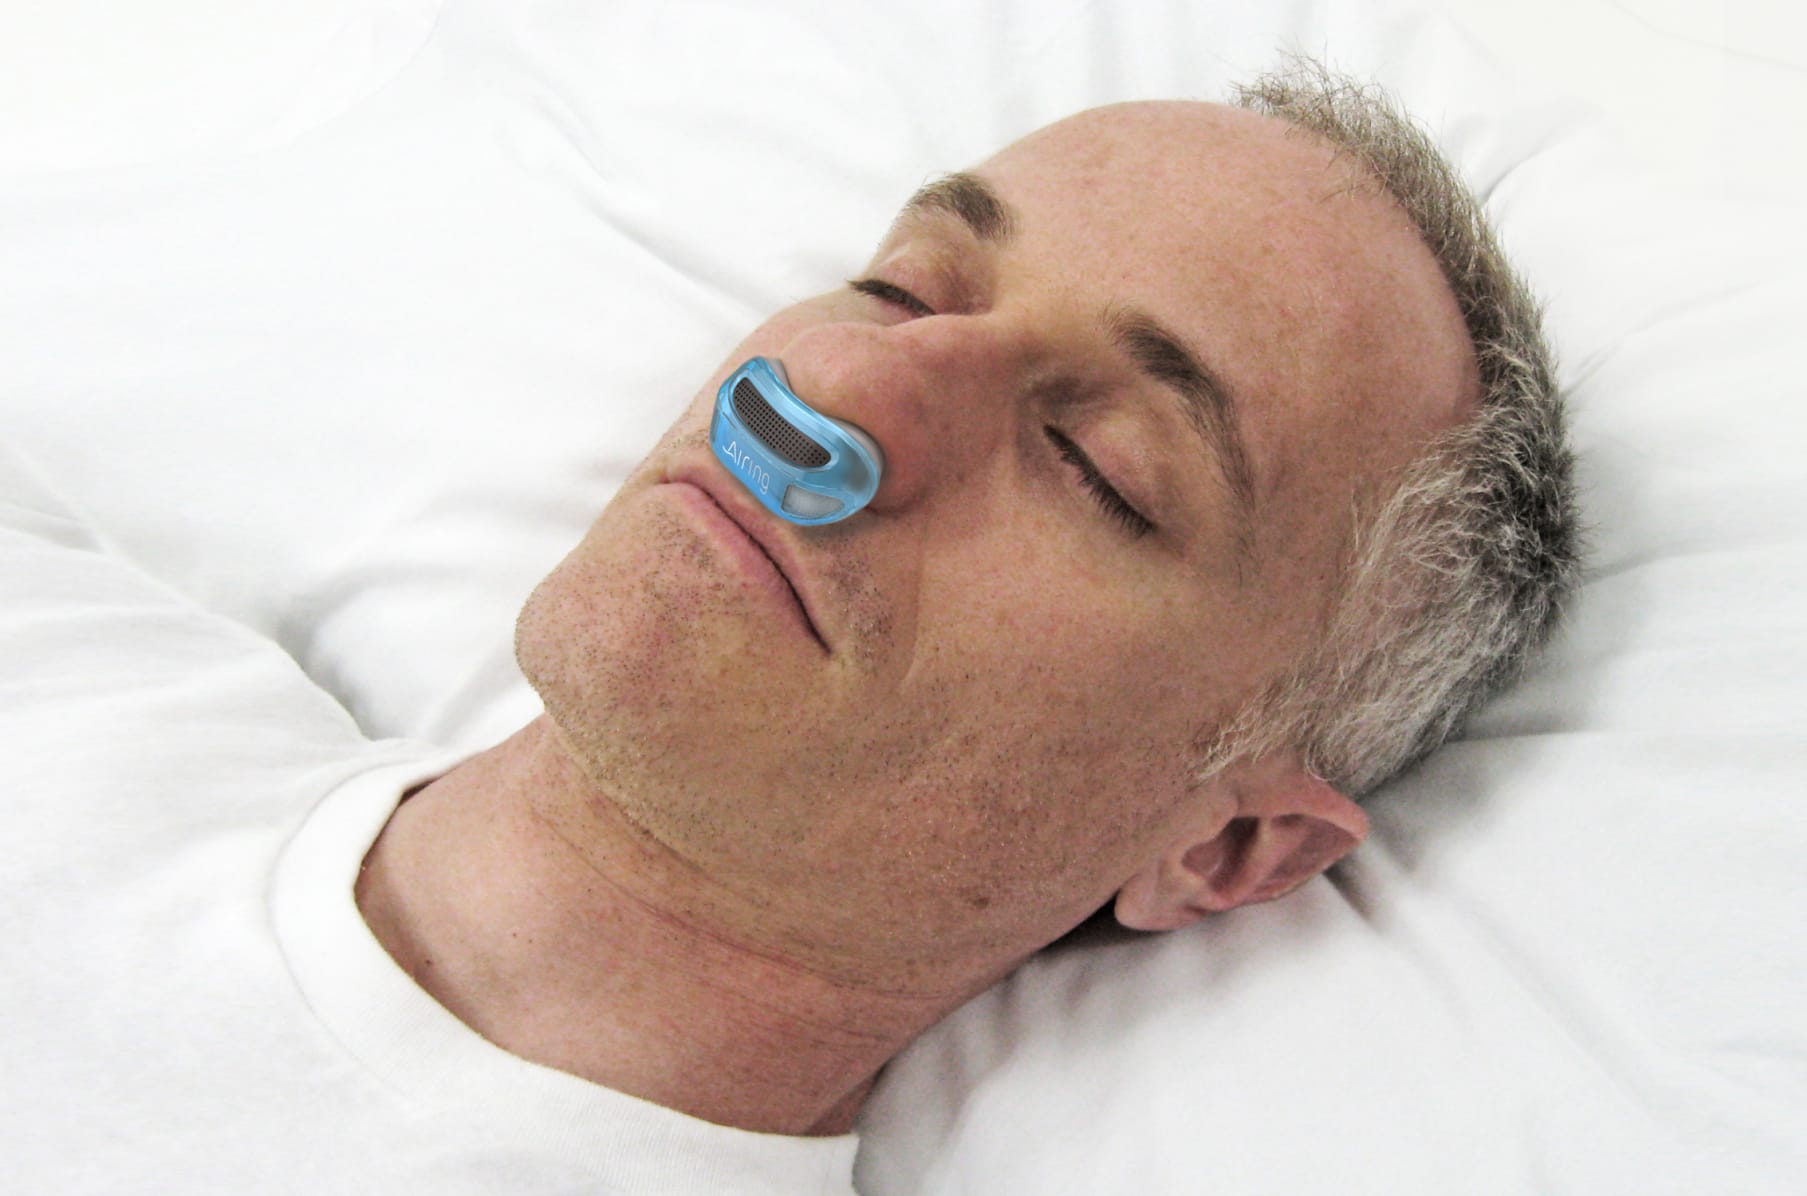 In Less Than 2 Hours, Airing Surpasses $100,000 Goal to Develop Micro-CPAP